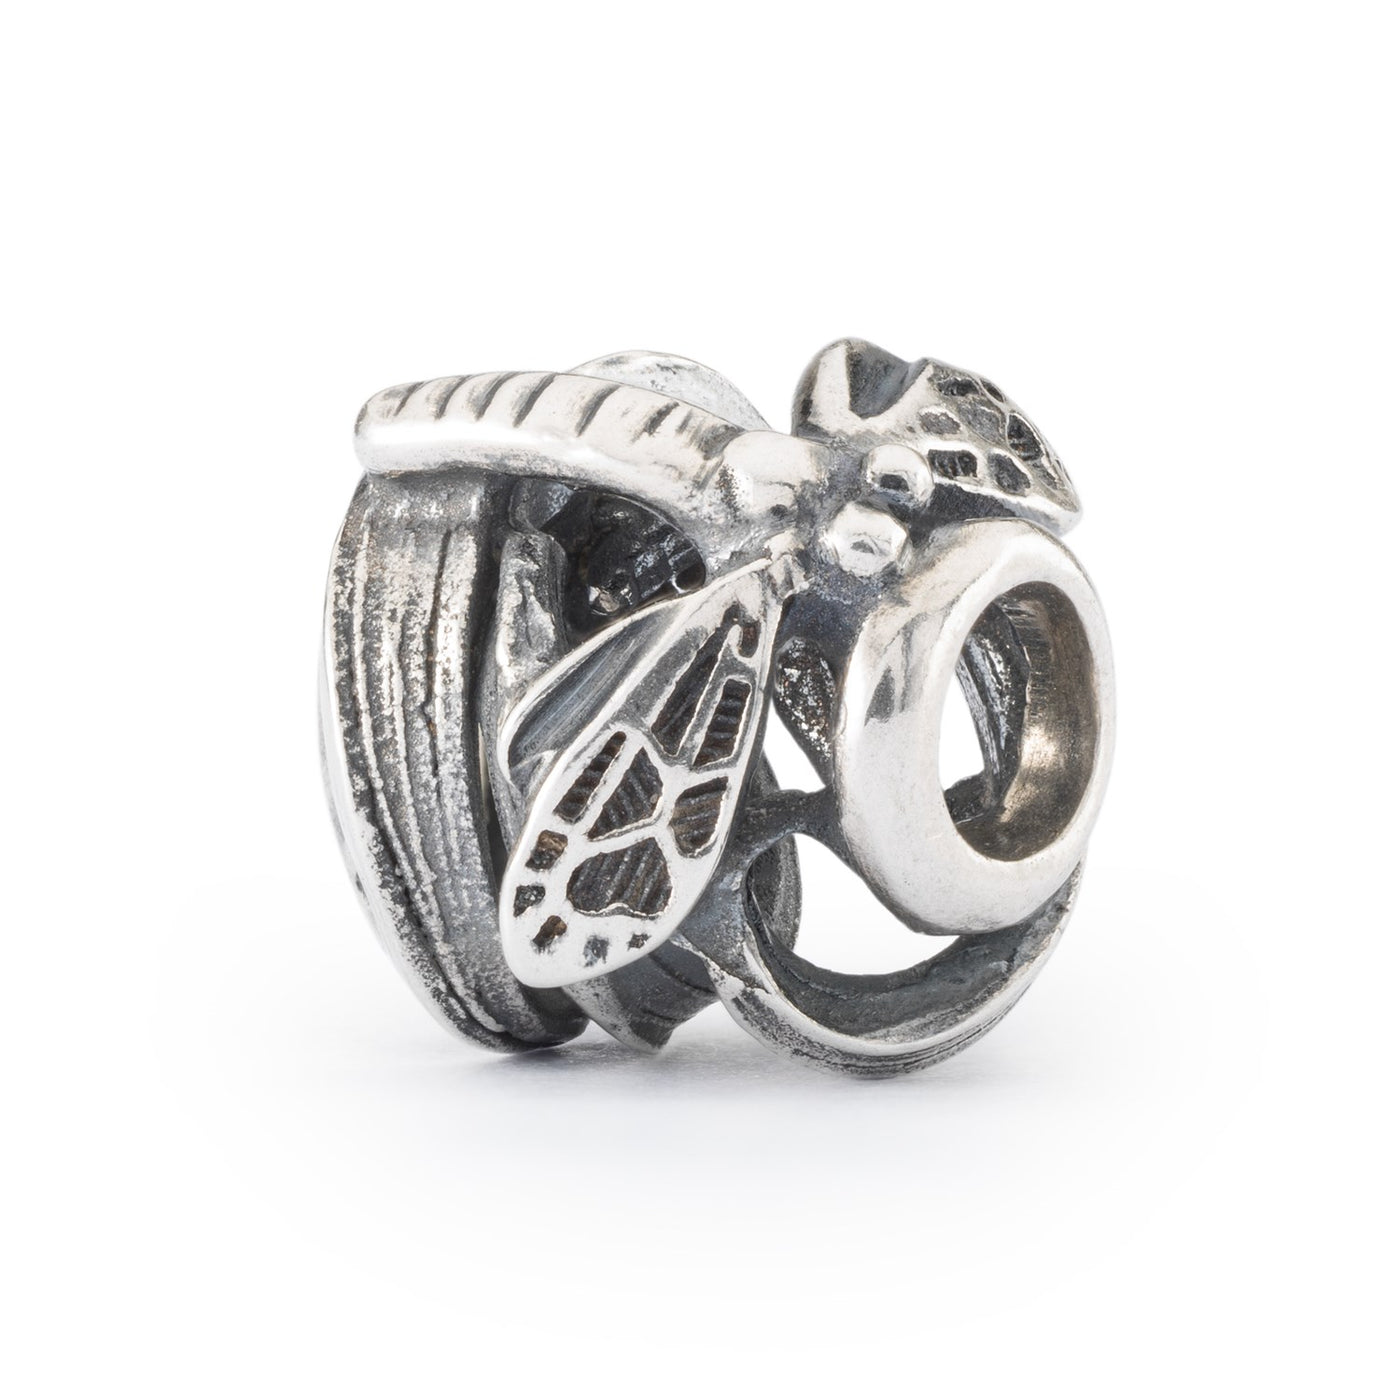 Enchanting Dragonfly is a sterling silver bead with a charming dragonfly design, symbolizing transformation and new perspectives, for your Trollbeads jewelry.